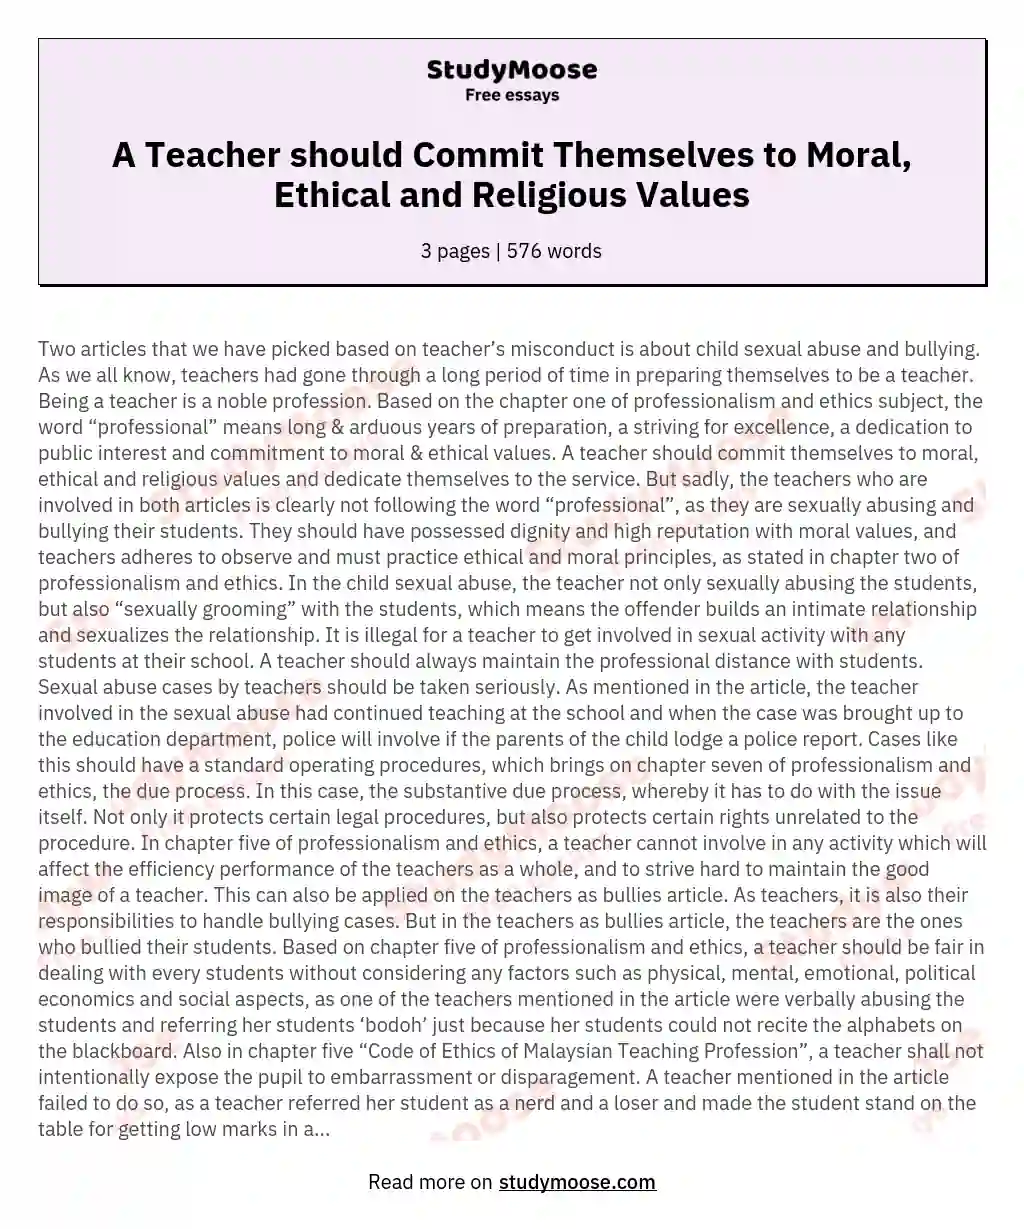 A Teacher should Commit Themselves to Moral, Ethical and Religious Values essay